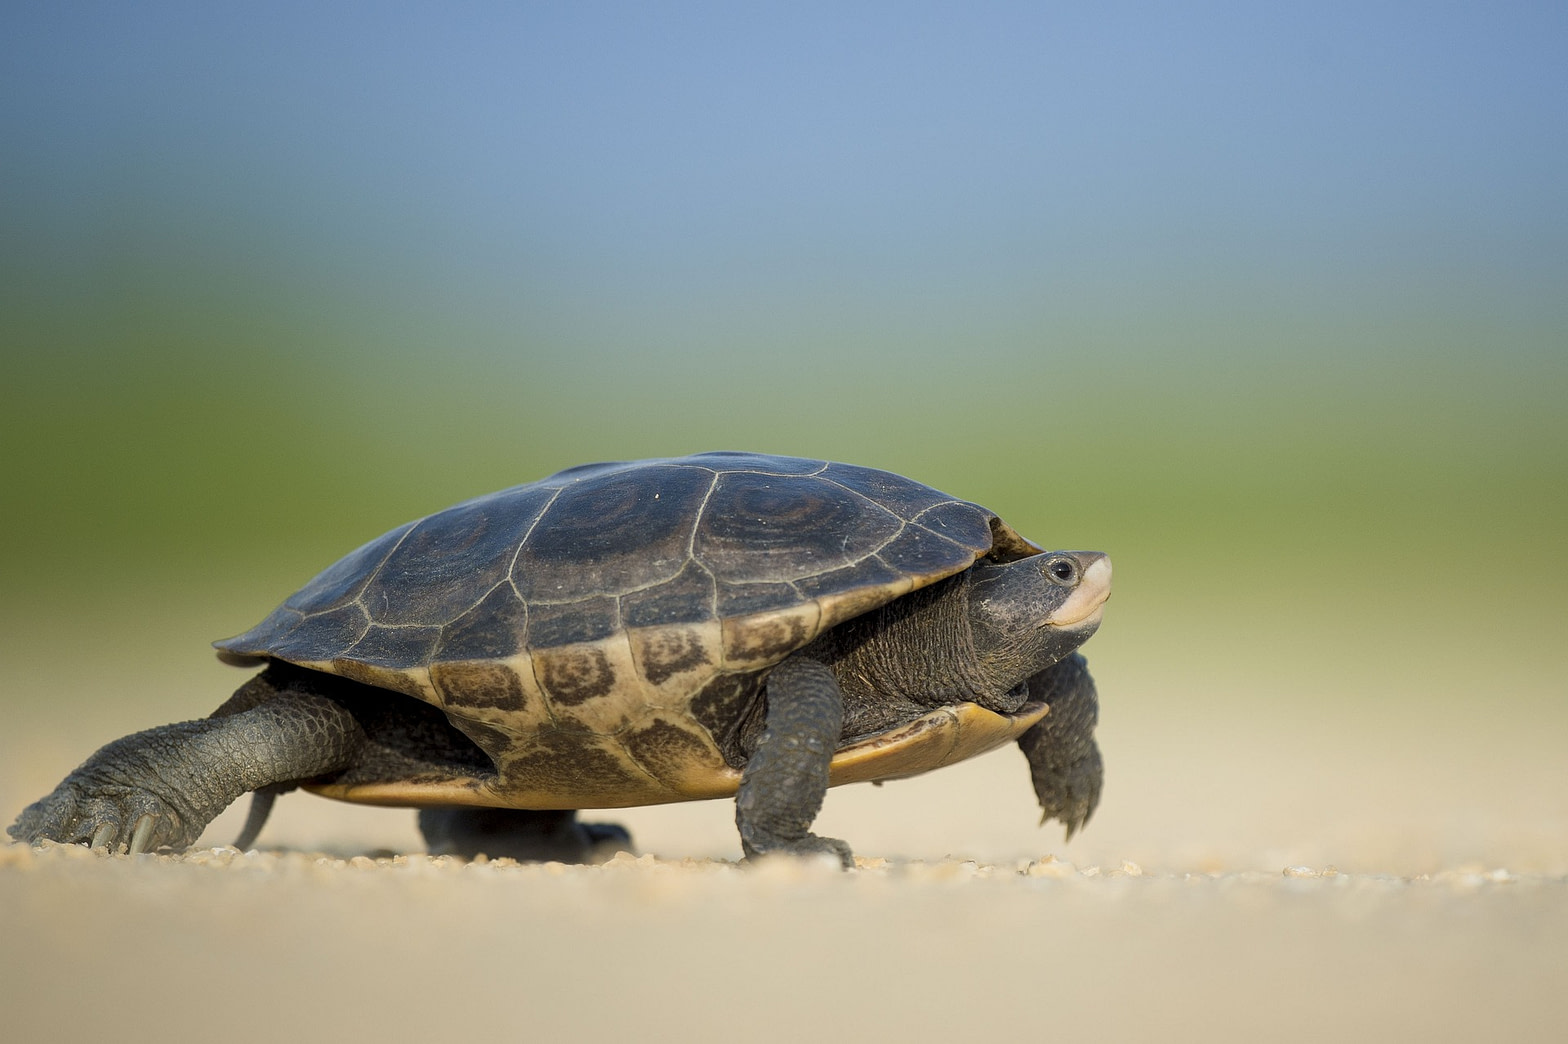 A slow-moving turtle.